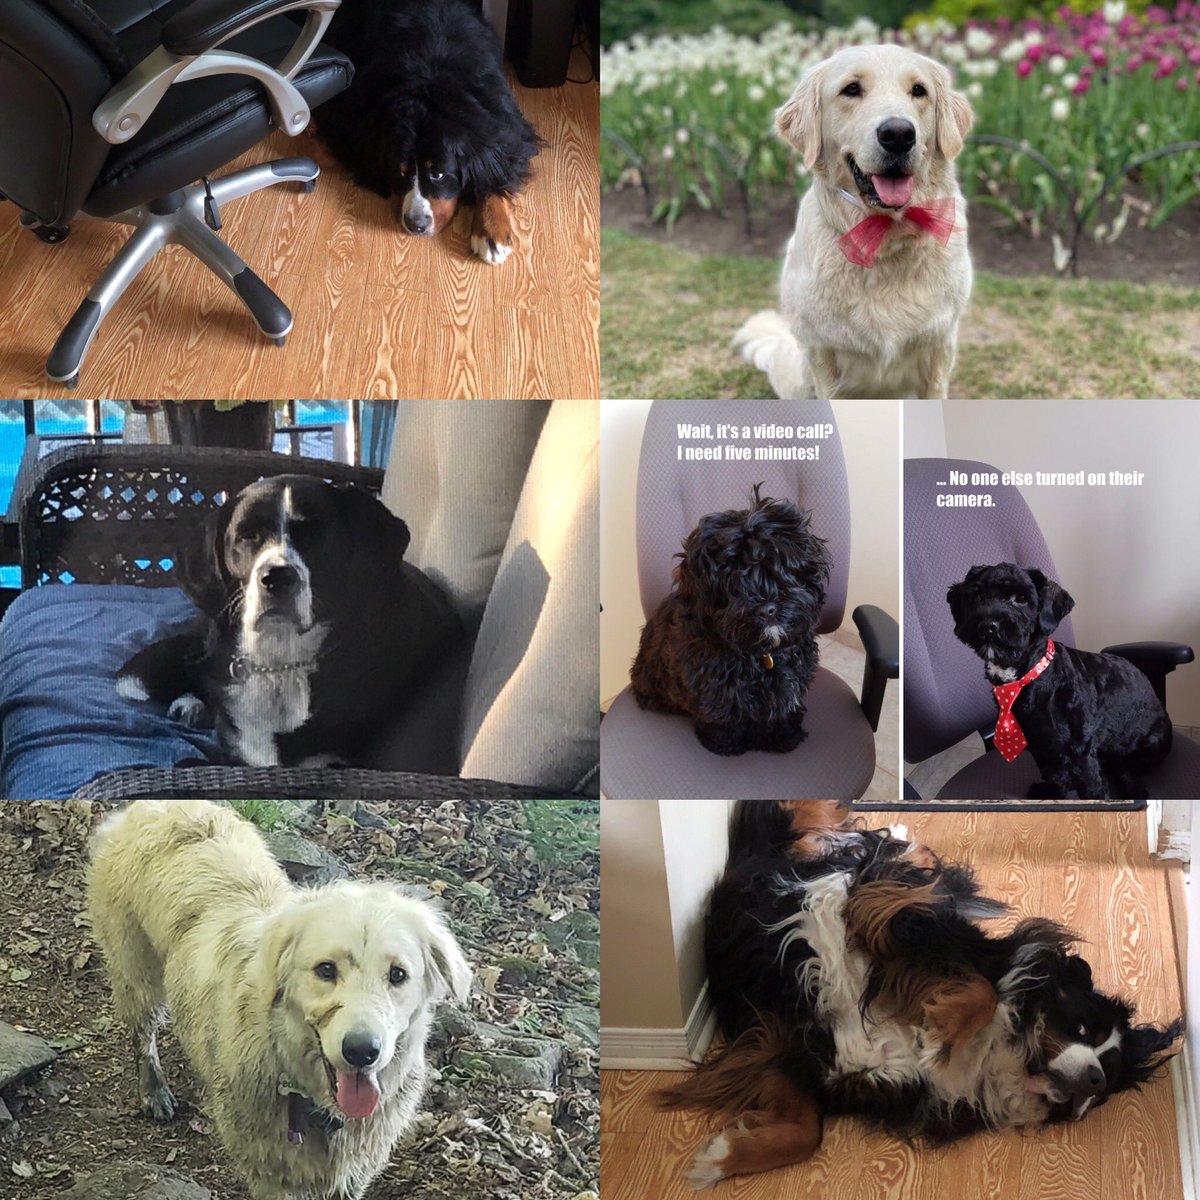 Over the past summer, the AC Community has been sharing how their furry friend has been helping them work from home, as part of the Dog Days of Summer! Here are just a few of the pups from the AC family! 🐶